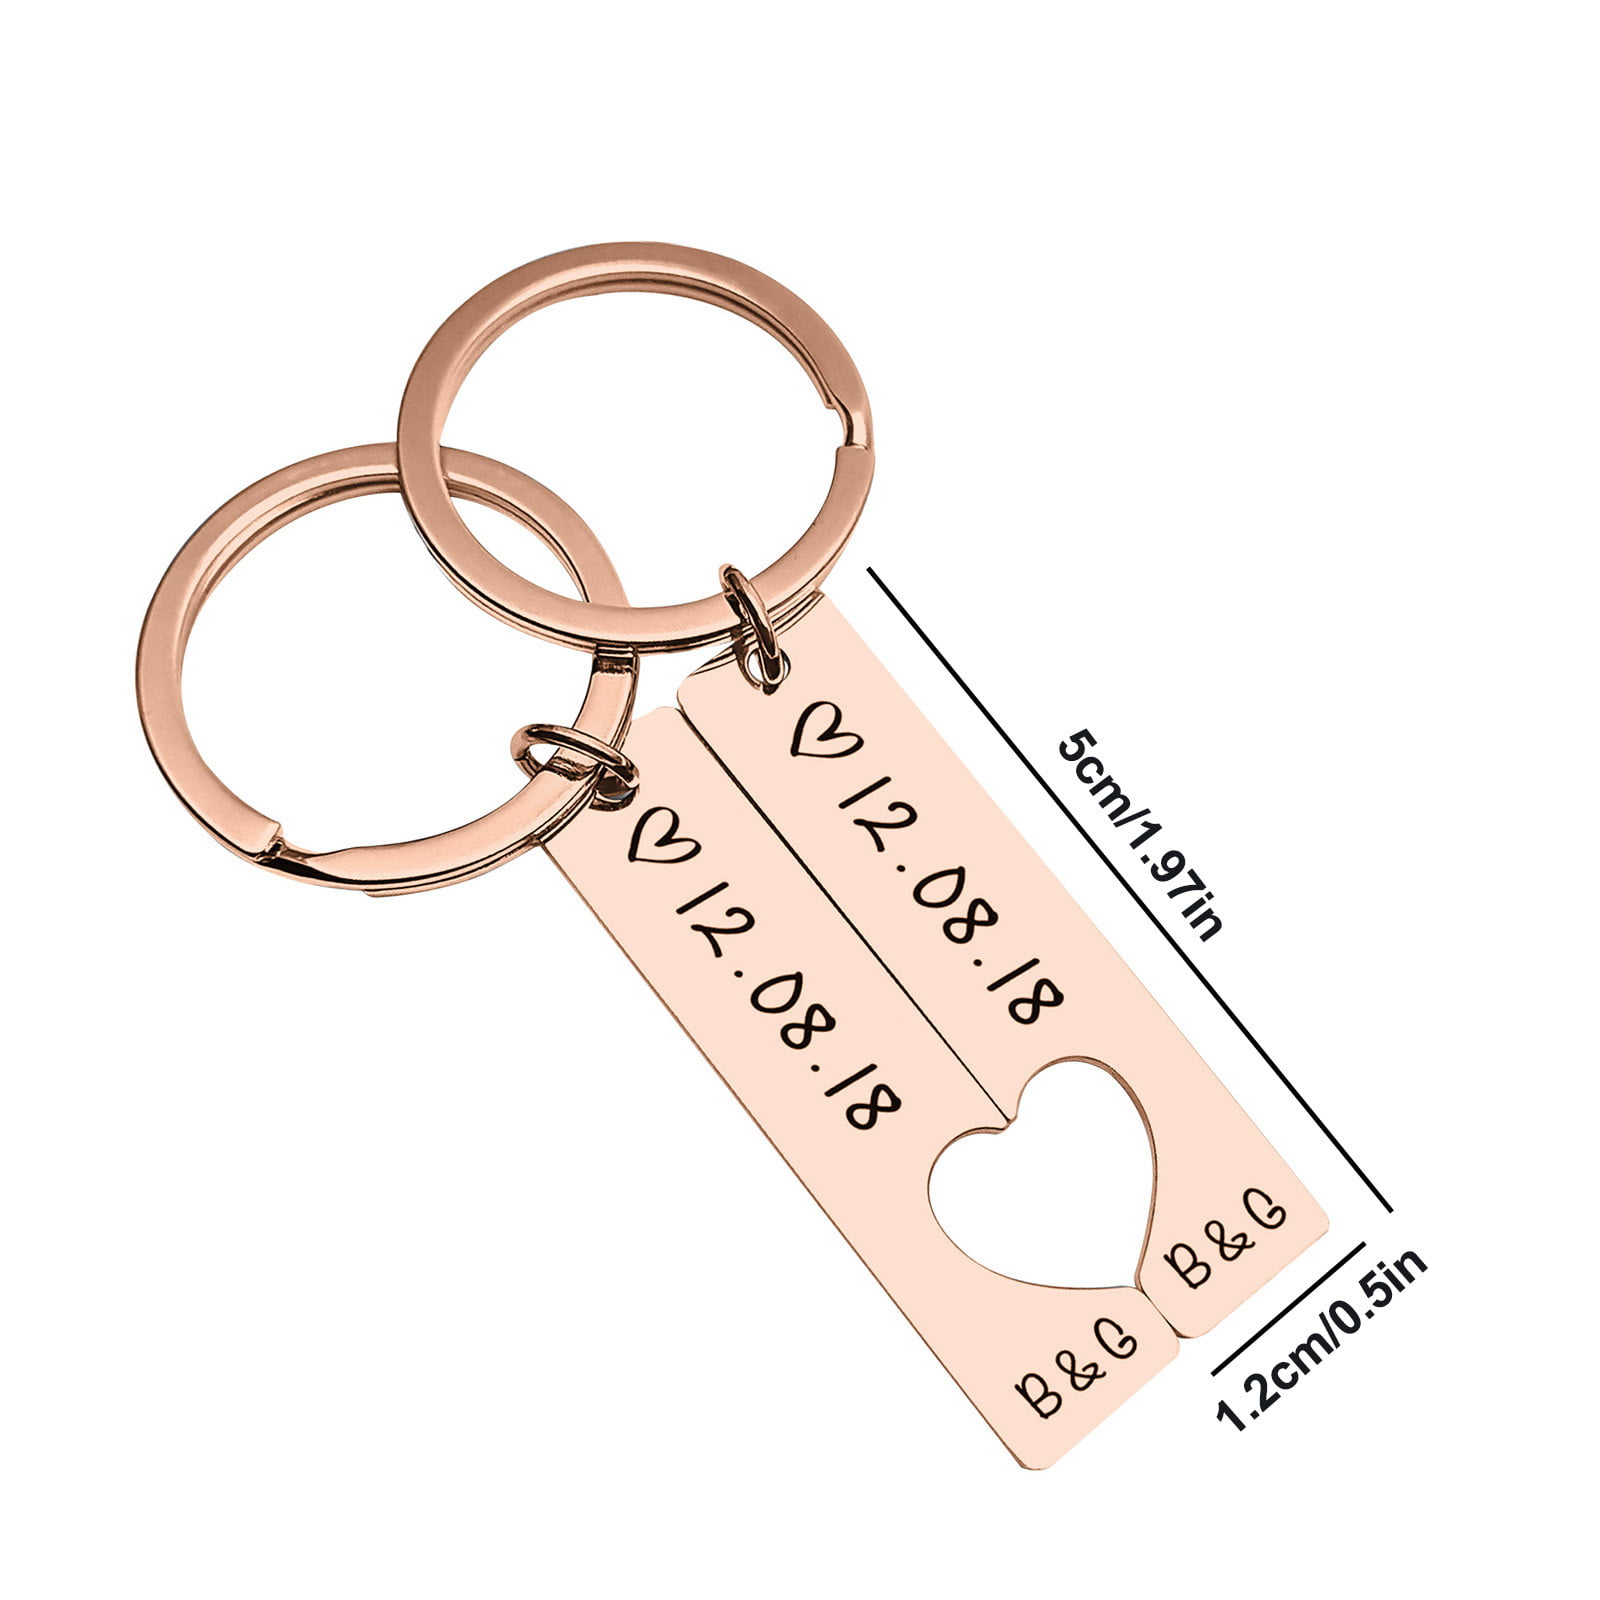 Engraved split Lock and Key Heart Keyring His Hers Couple gift in gold bag 